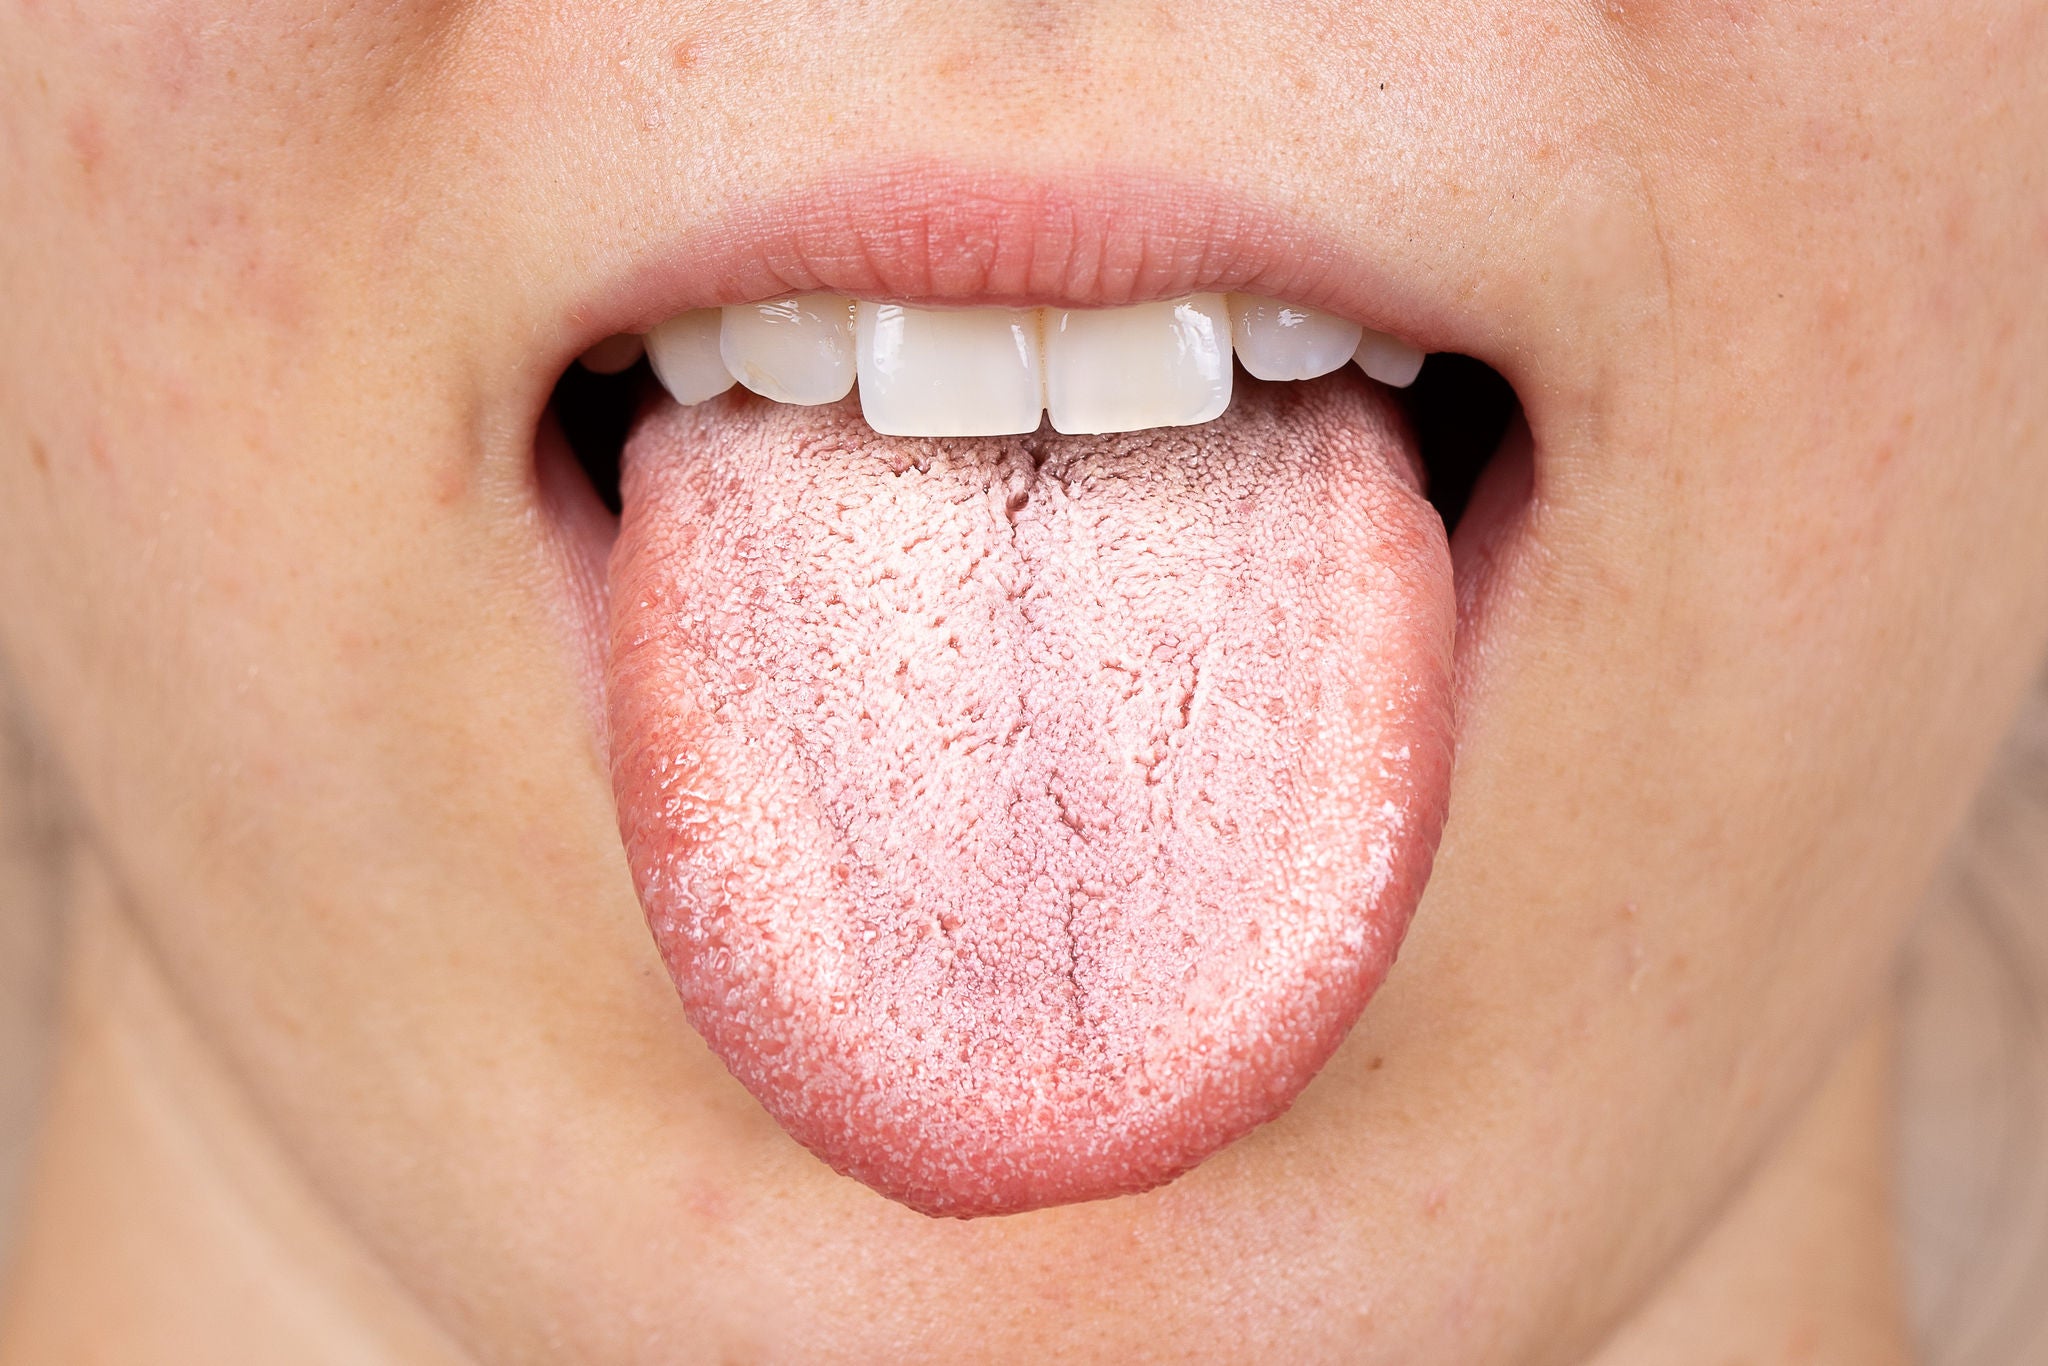 A close up view on the white furry tongue of a young Caucasian girl. A common symptom of a candida albicans yeast infection., A close up view on the white furry tongue of a young Caucasian g